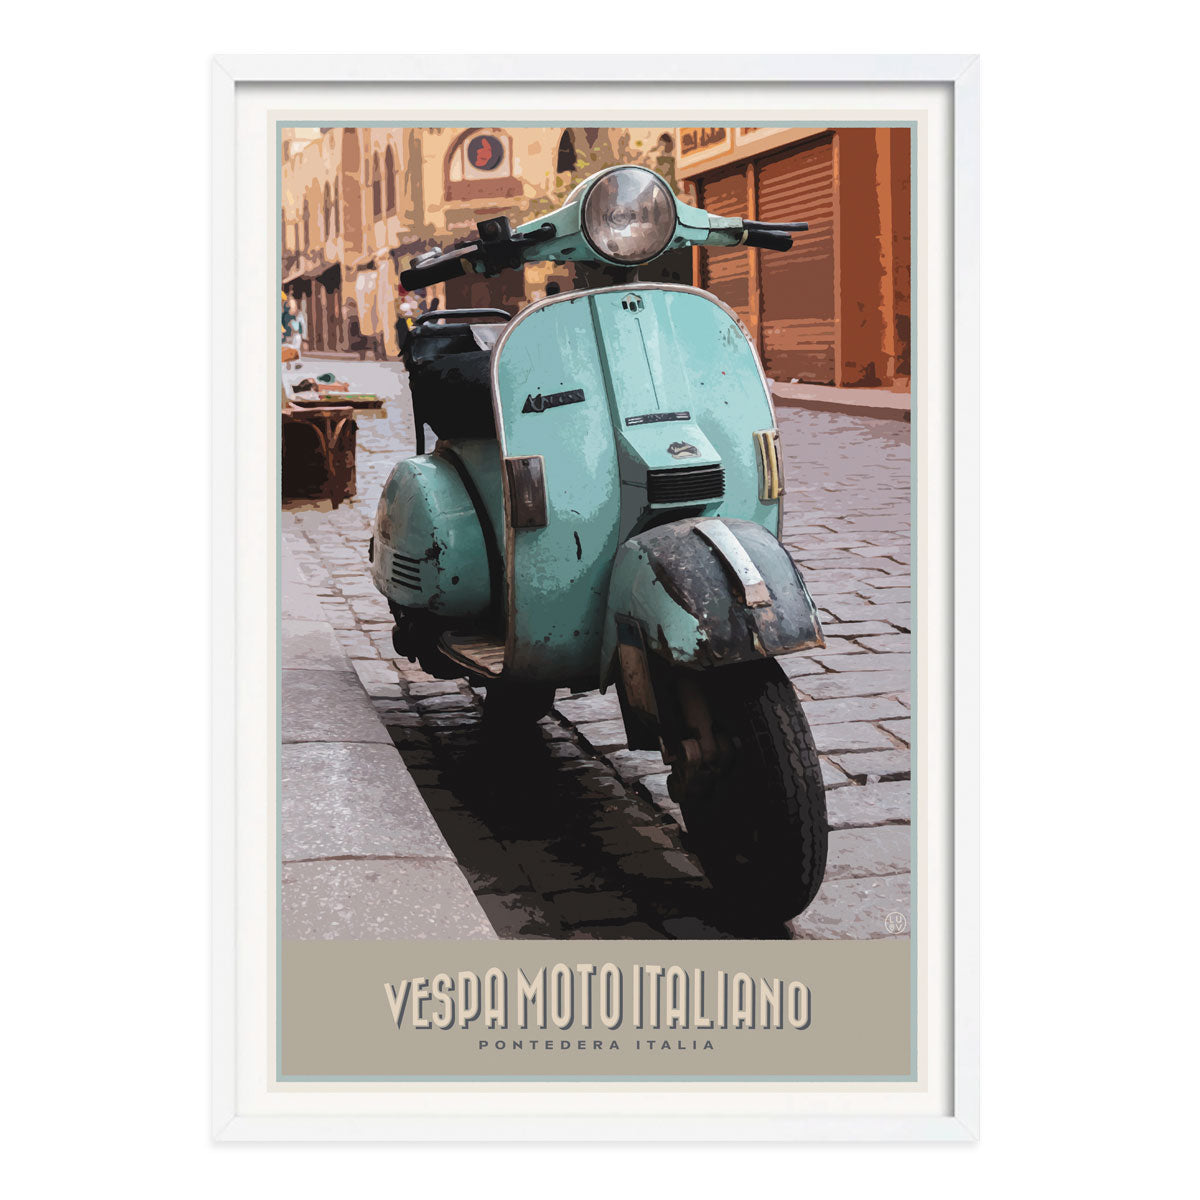 Vespa italy vintage retro poster print in white frame by Places We Luv